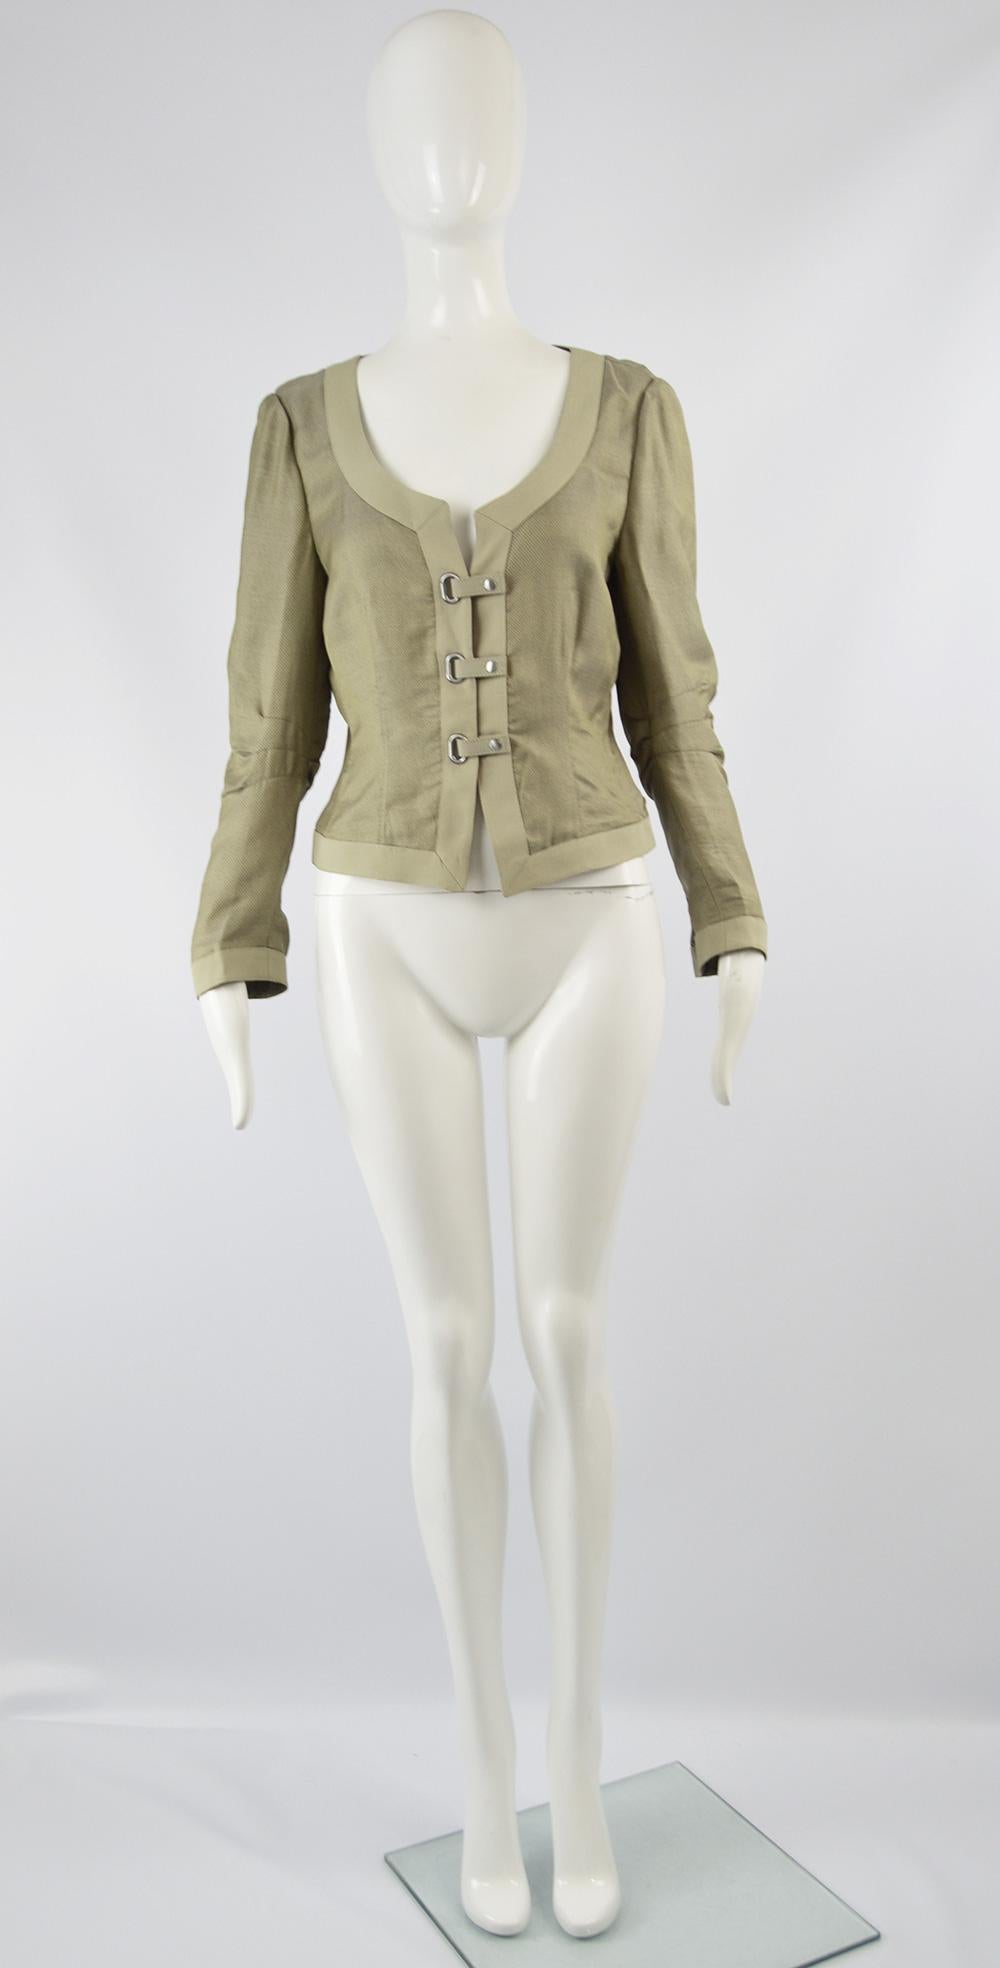 An excellent women's jacket by luxury Italian fashion designer Giorgio Armani. In a lightweight silk and rayon mesh / organza slightly iridescent fabric with a grosgrain trim and unique snap loop fastening that gives a futuristic, avant garde feel.